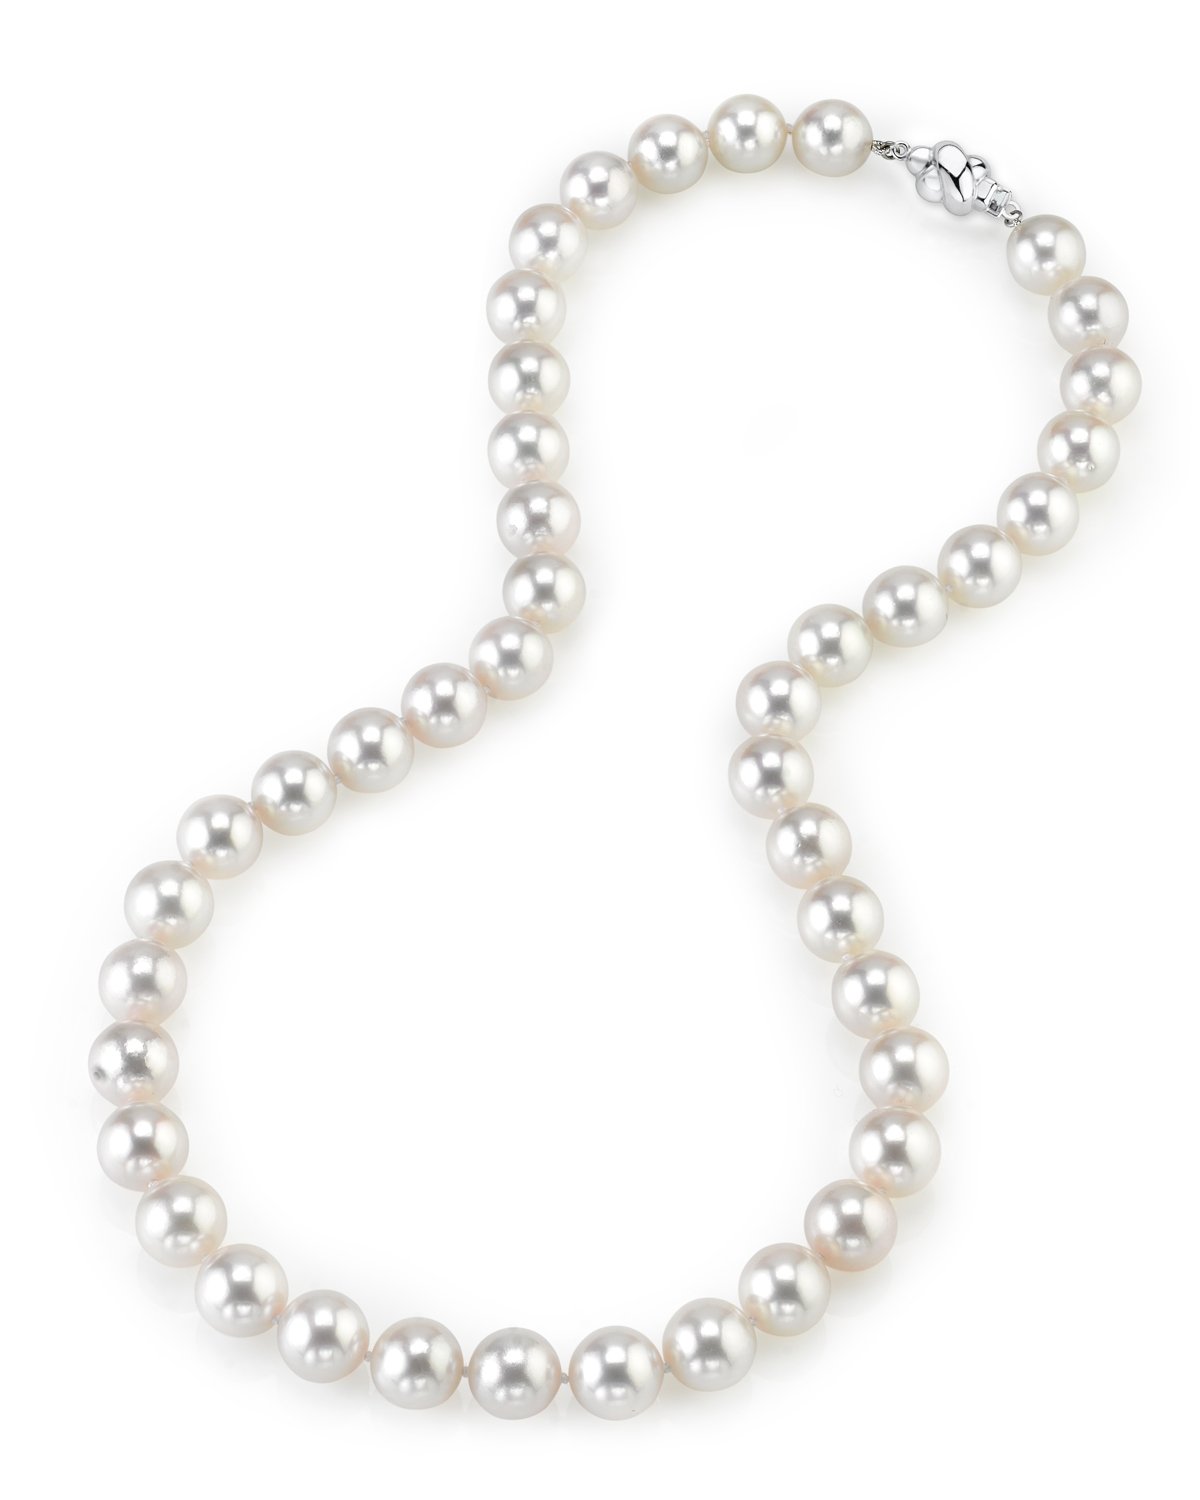 10-10.5mm Japanese Akoya White Pearl Necklace - AAA Quality